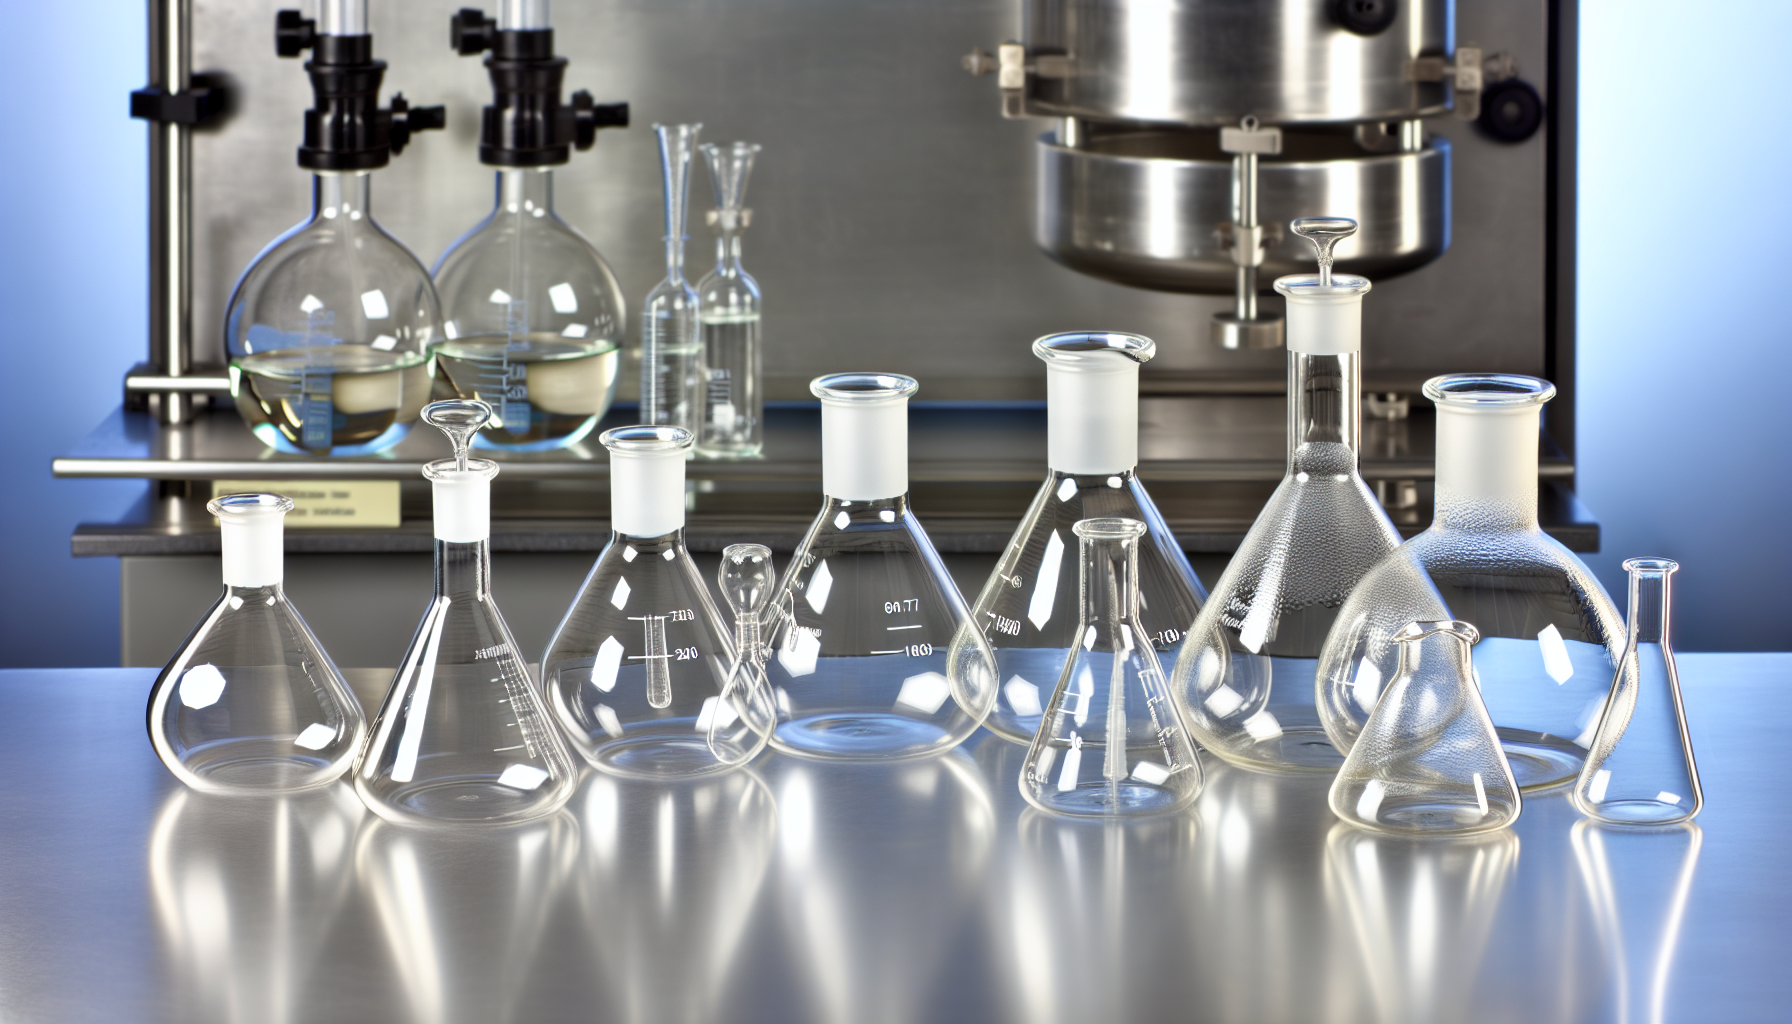 Various types of Erlenmeyer flasks made of borosilicate glass